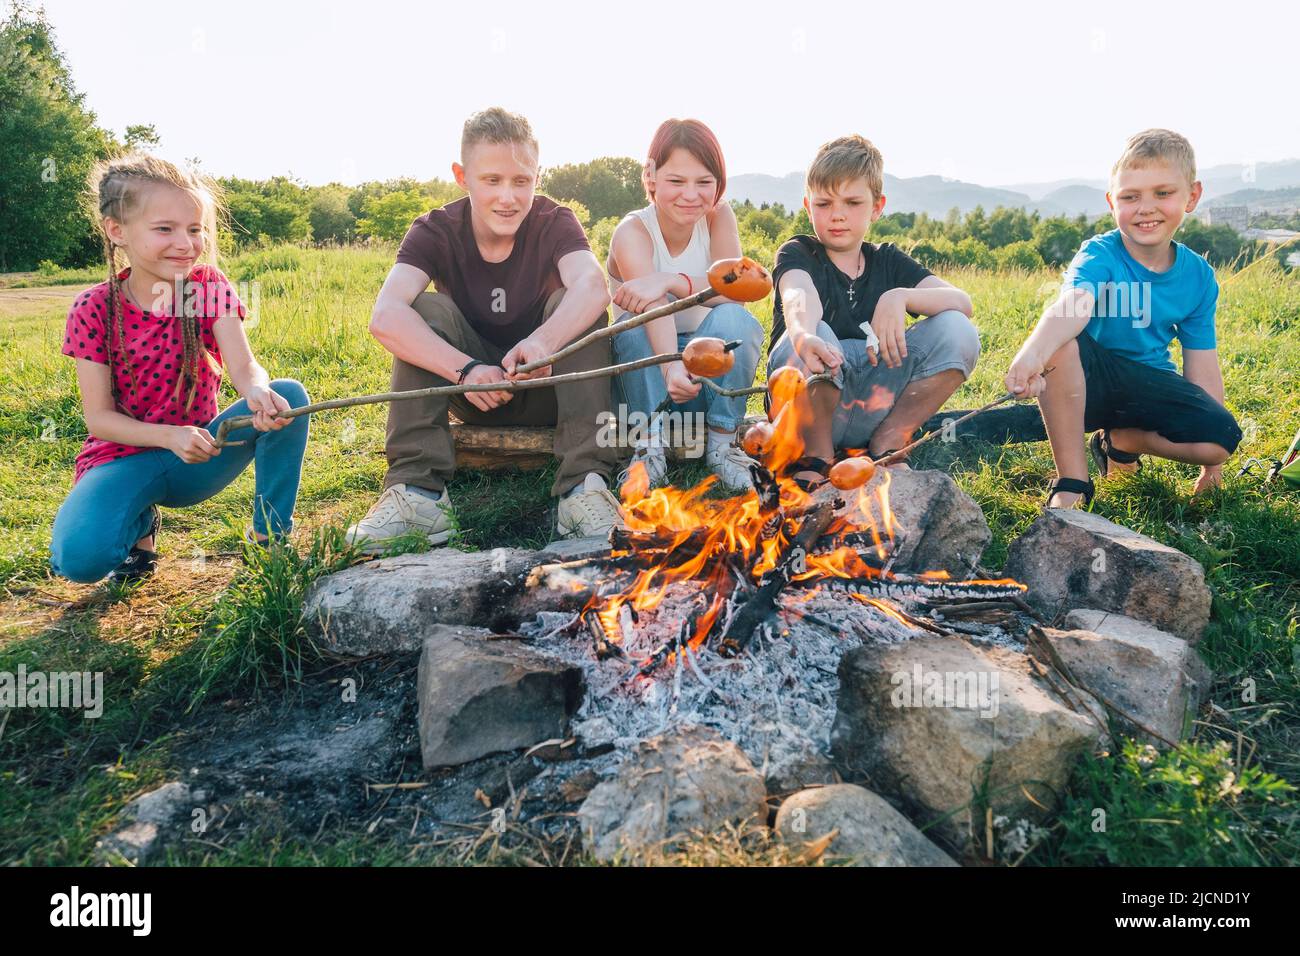 Group of Kids - Boys and girls cheerfully smiling and roasting sausages on long sticks over a campfire flame. Outdoor active time spending or camping Stock Photo